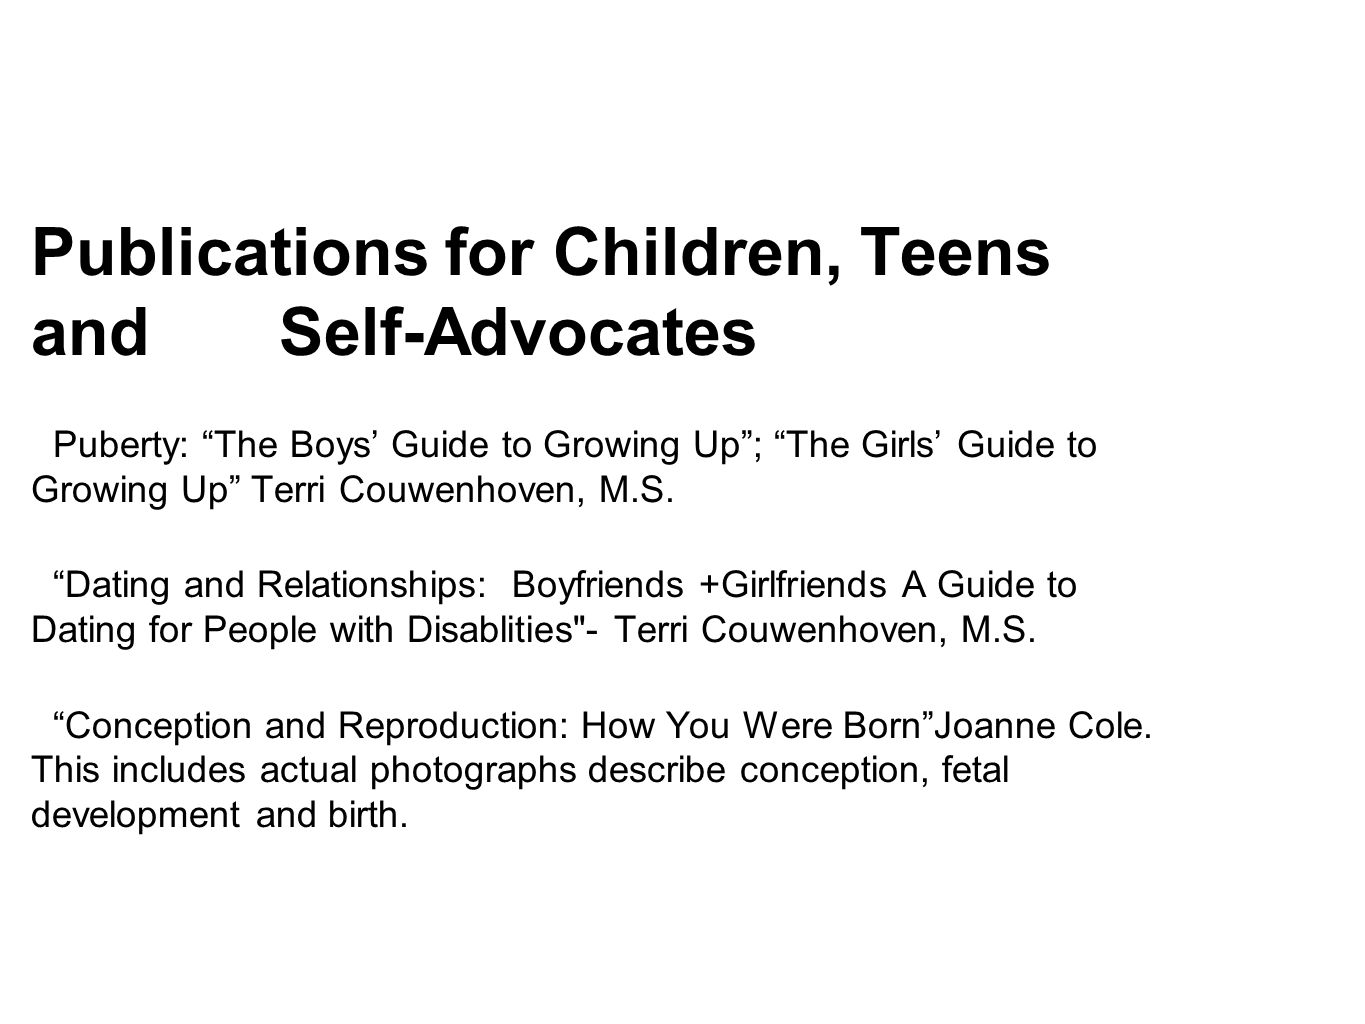 The Girls' Guide to Growing Up: Choices book by Terri Couwenhoven